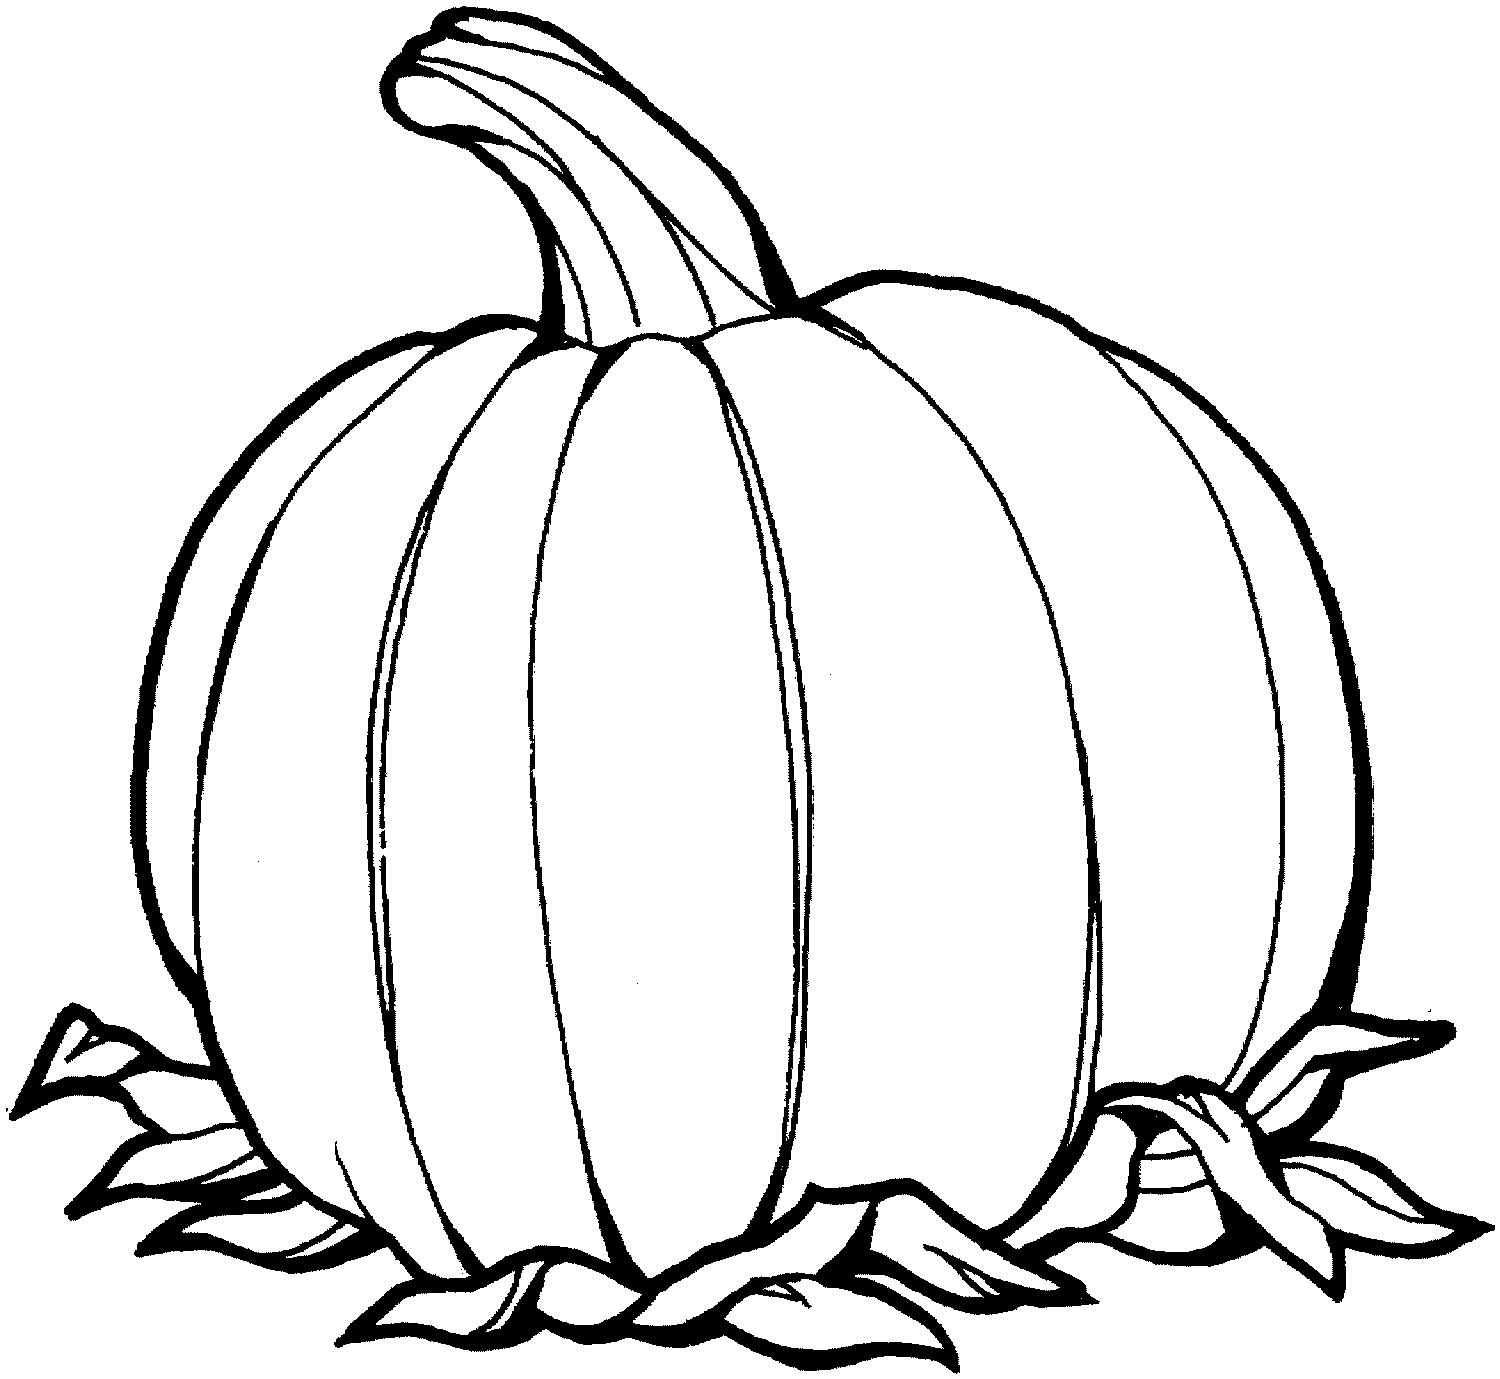 Whimsical pumpkin coloring page